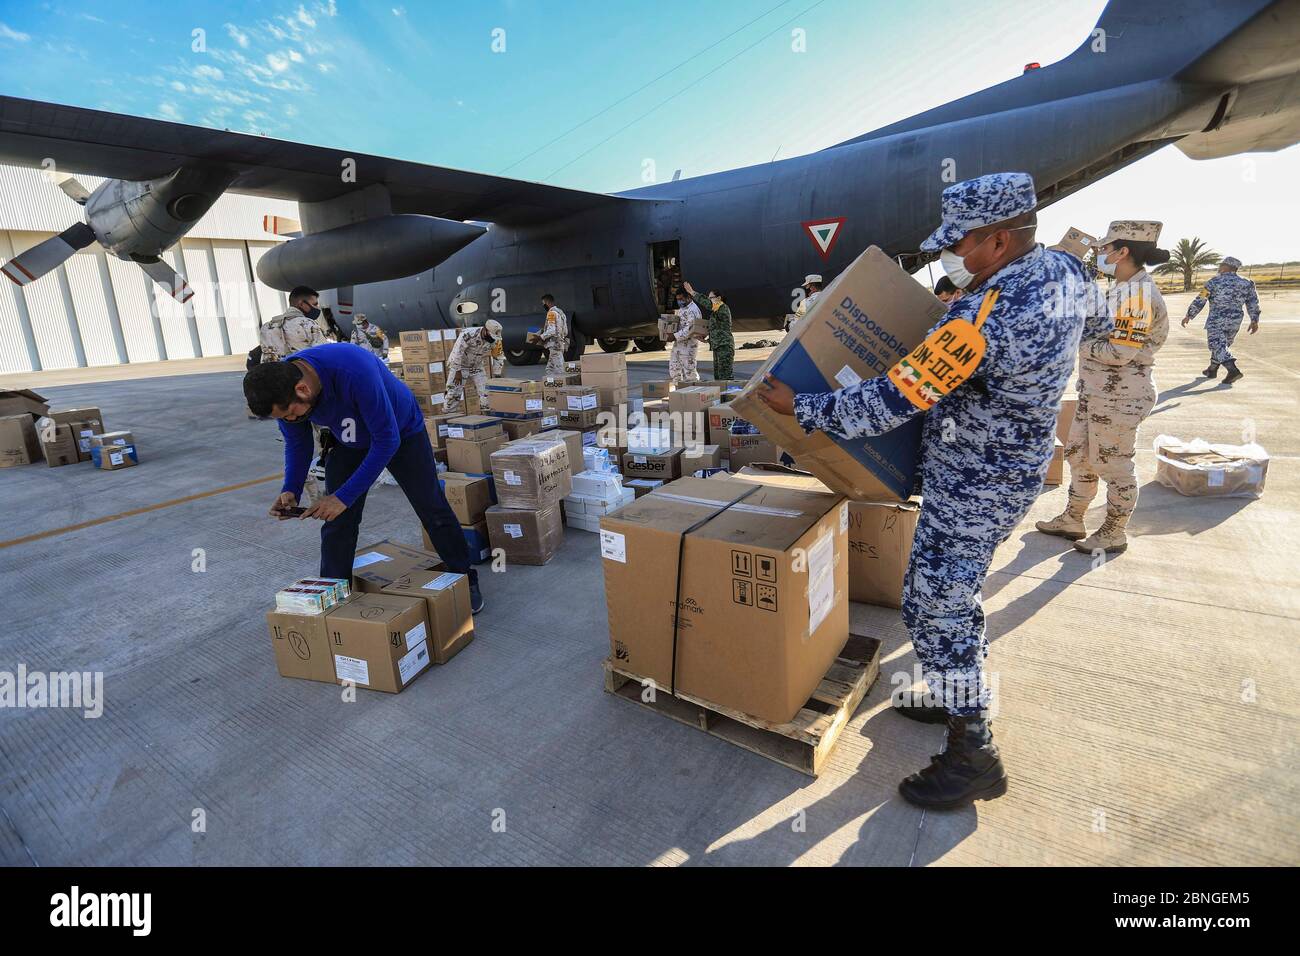 HERMOSILLO, MEXICO - MAY 14: Soldiers of the Mexican Army and Air Force unload Hercules C-130 aircraft, equipment, material and medical supplies to attend the health emergency due to the Coronavirus on May 14, 2020 in Hermosillo, Mexico. Landing (Photo by Luis Gutierrez / Norte Photo /)  HERMOSILLO, MEXICO - MAY 14: Soldados del ejercito mexicano y  Fuerza Aérea descargan de avion Hércules C-130 equipo, material e insumos médicos para atender la emergencia sanitaria por el Coronavirus on May 14, 2020 in Hermosillo, Mexico. Aterrizaje (Photo by Luis Gutierrez/ Norte Photo/) Stock Photo